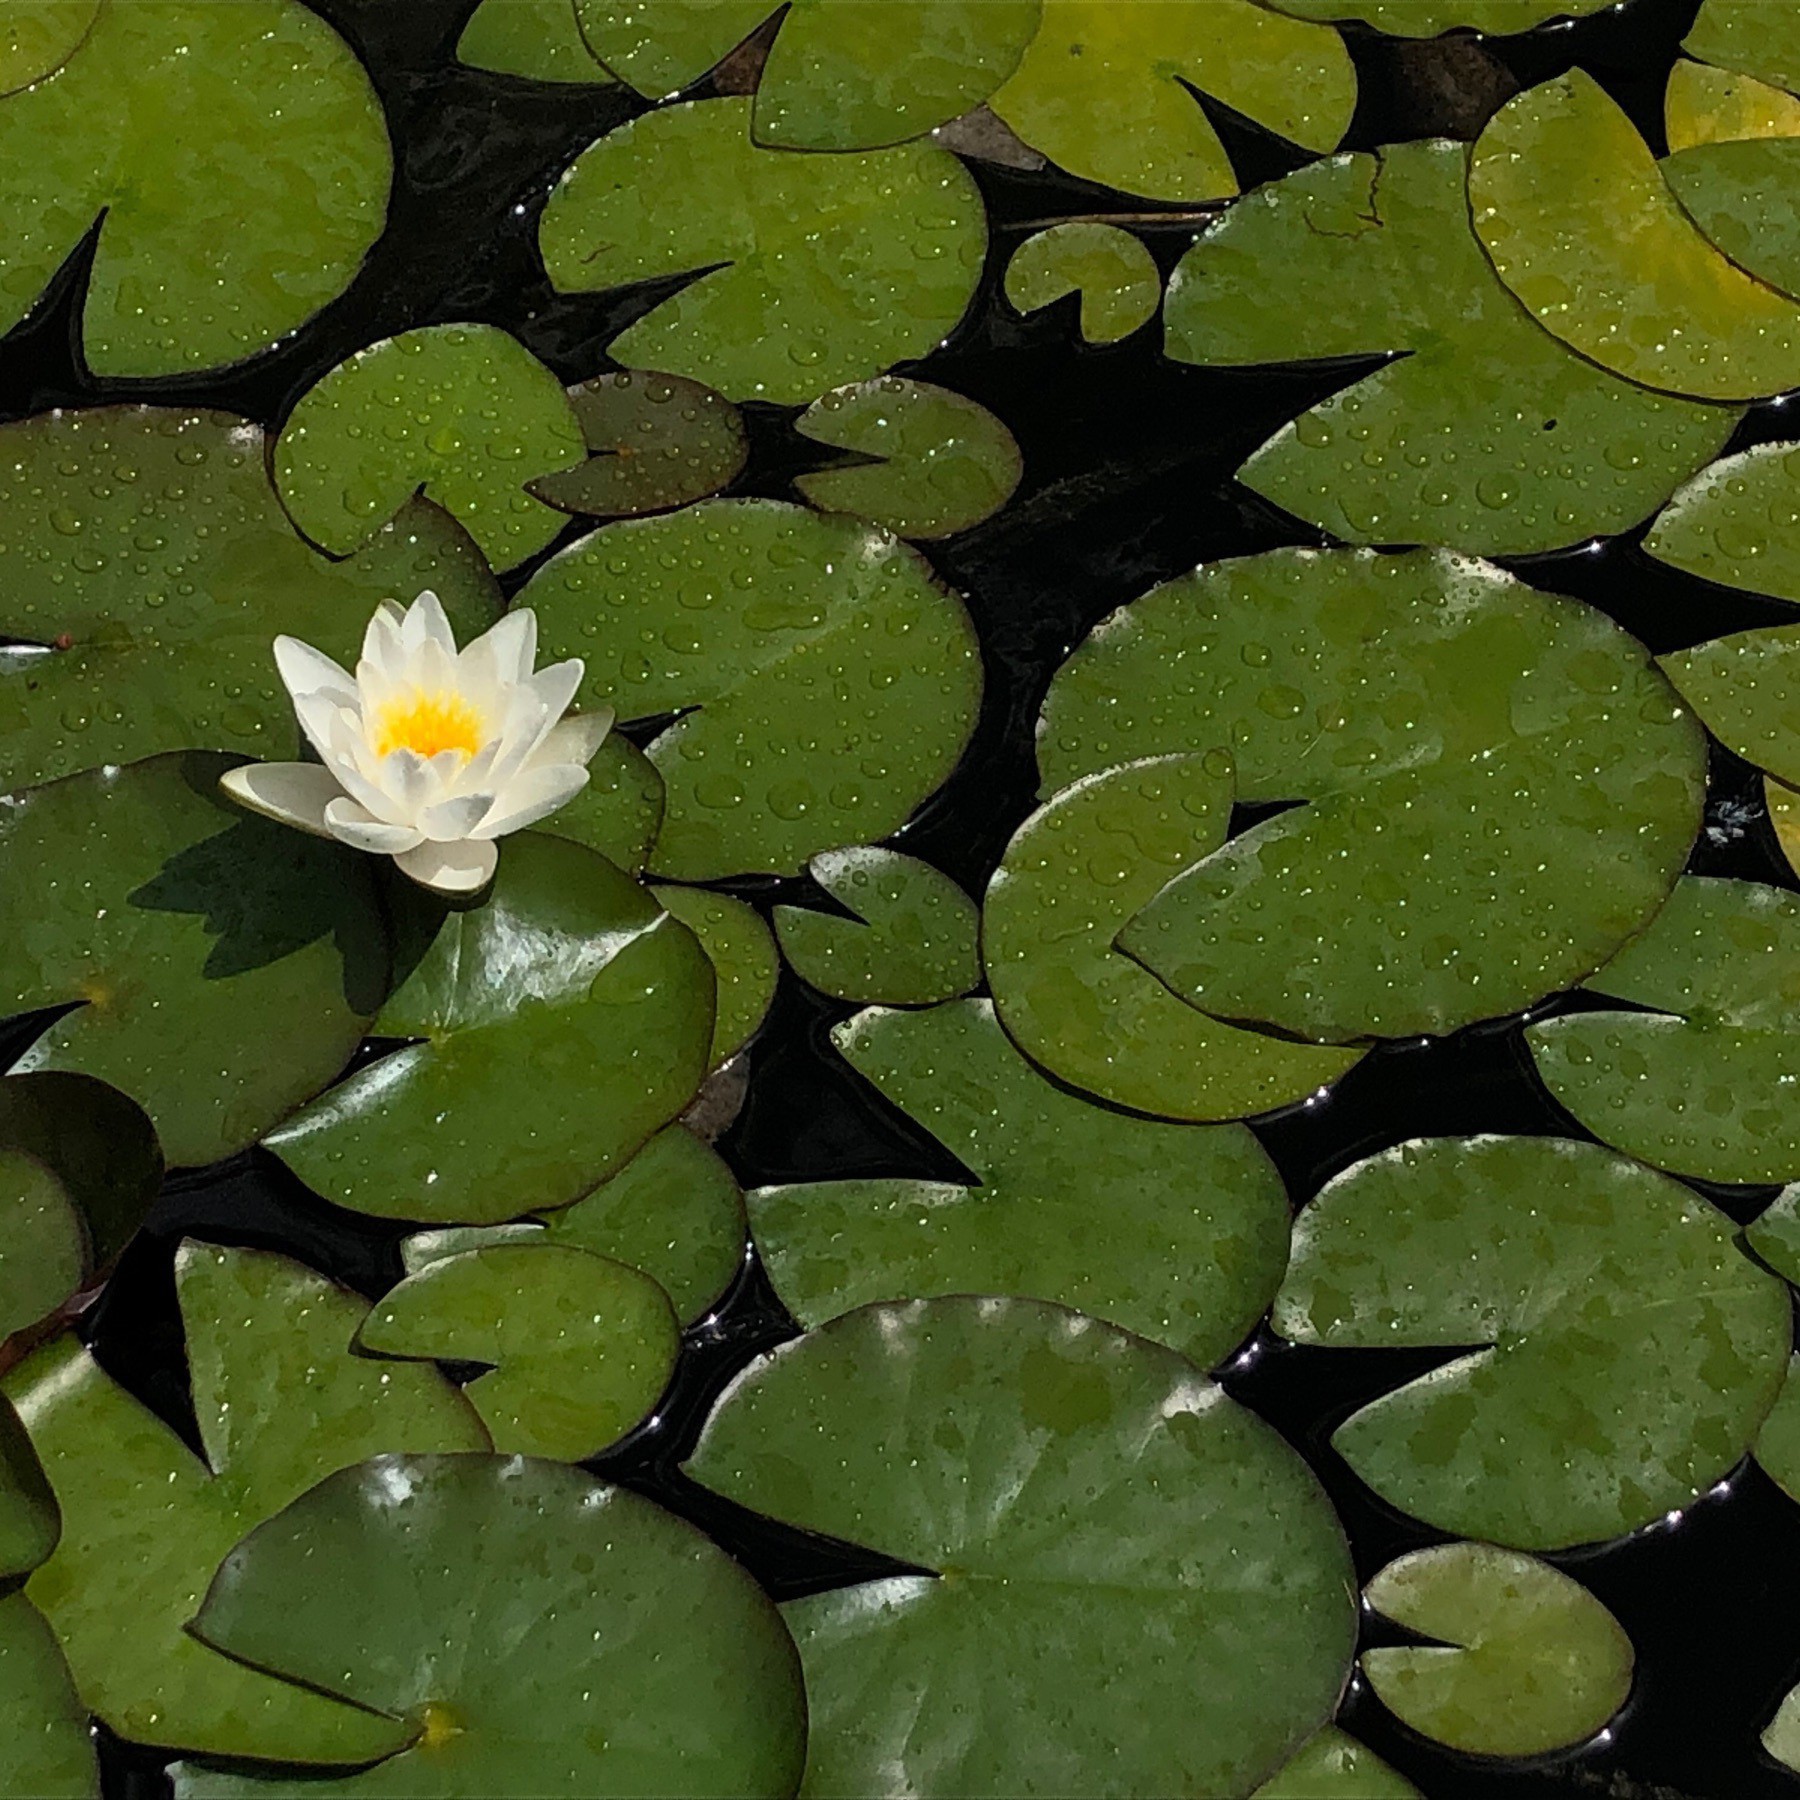 Water lily and lily pads.